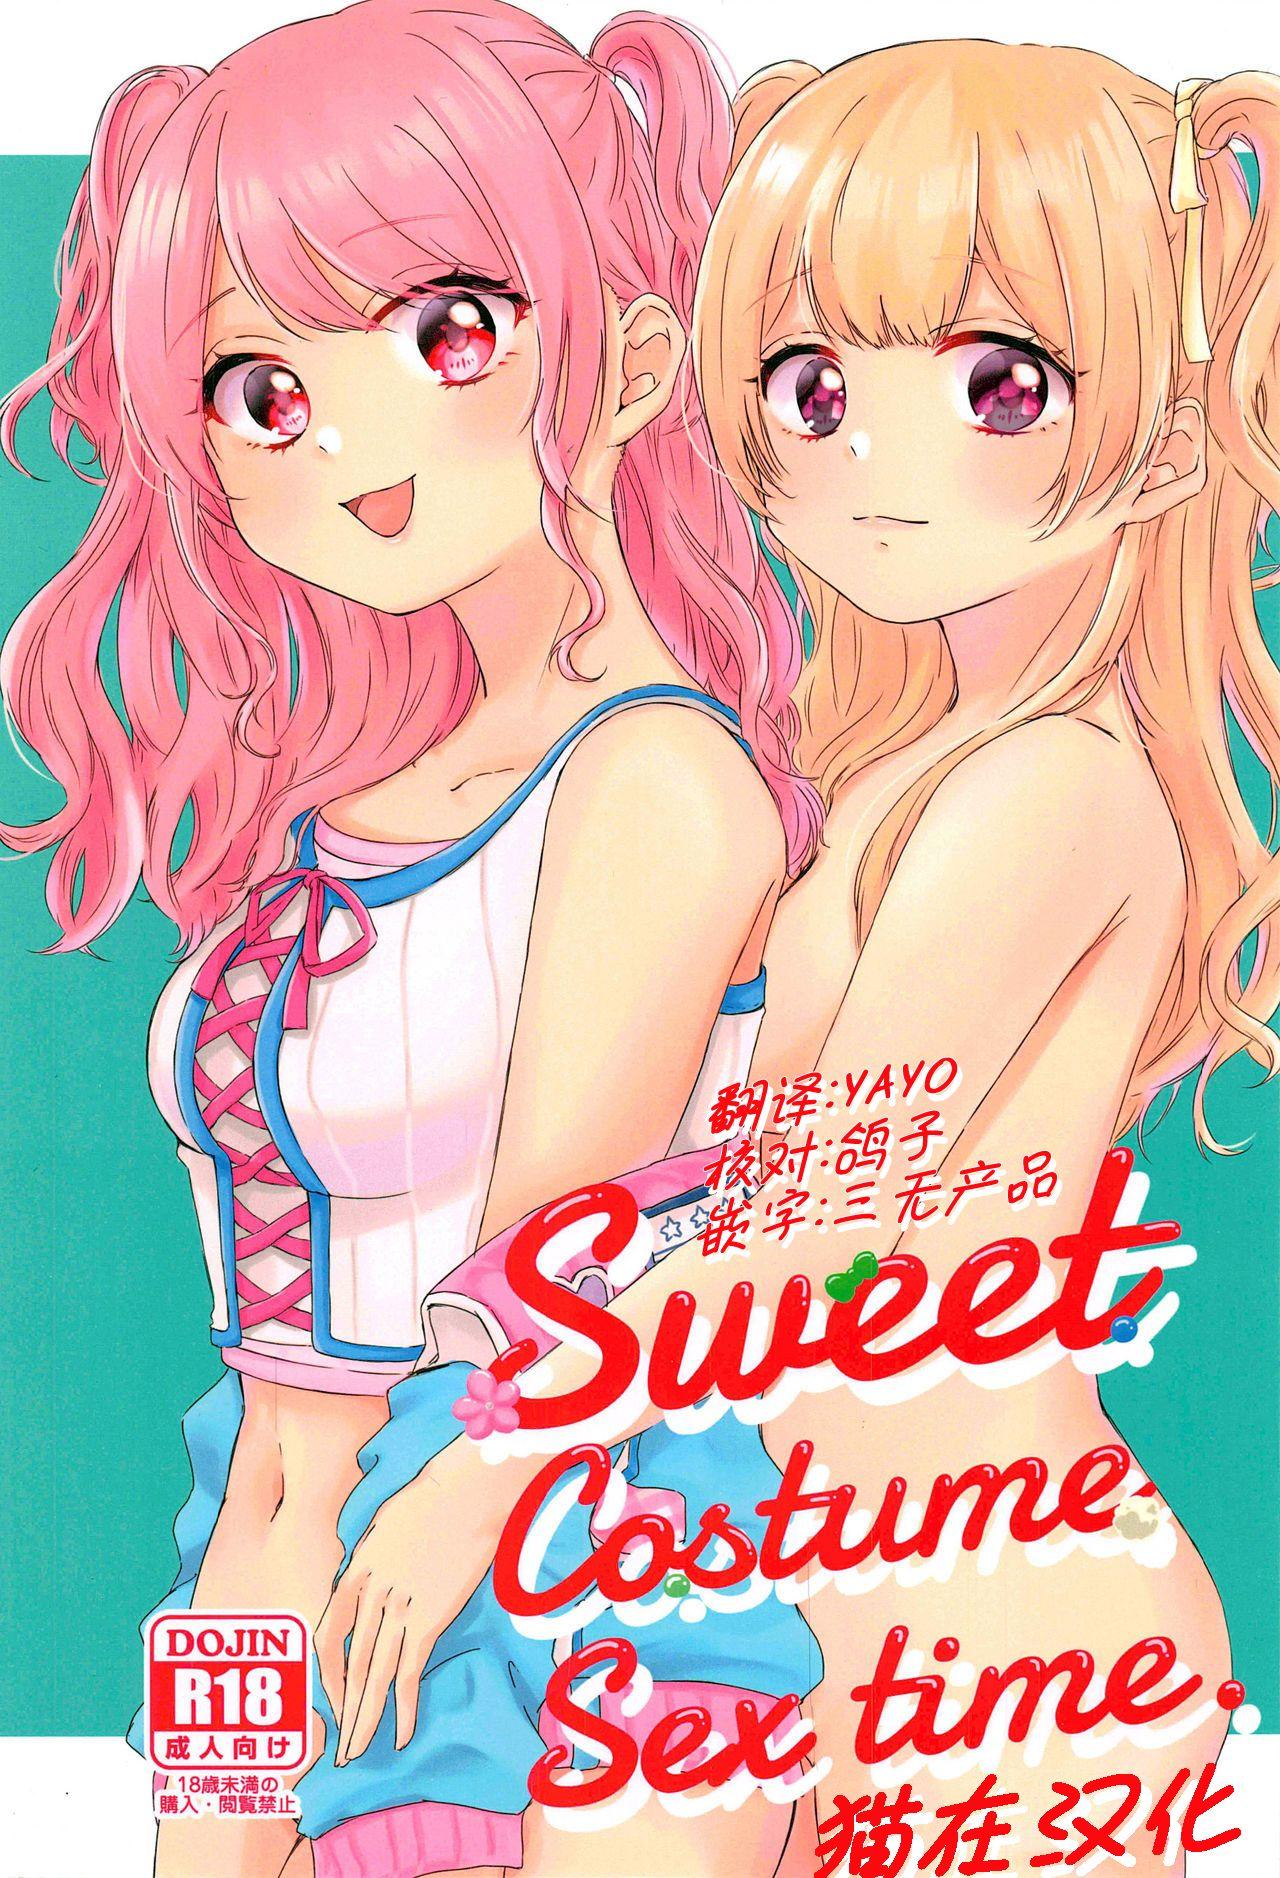 Doggy Style Porn Sweet Costume Sex time. - Bang dream Rica - Page 1